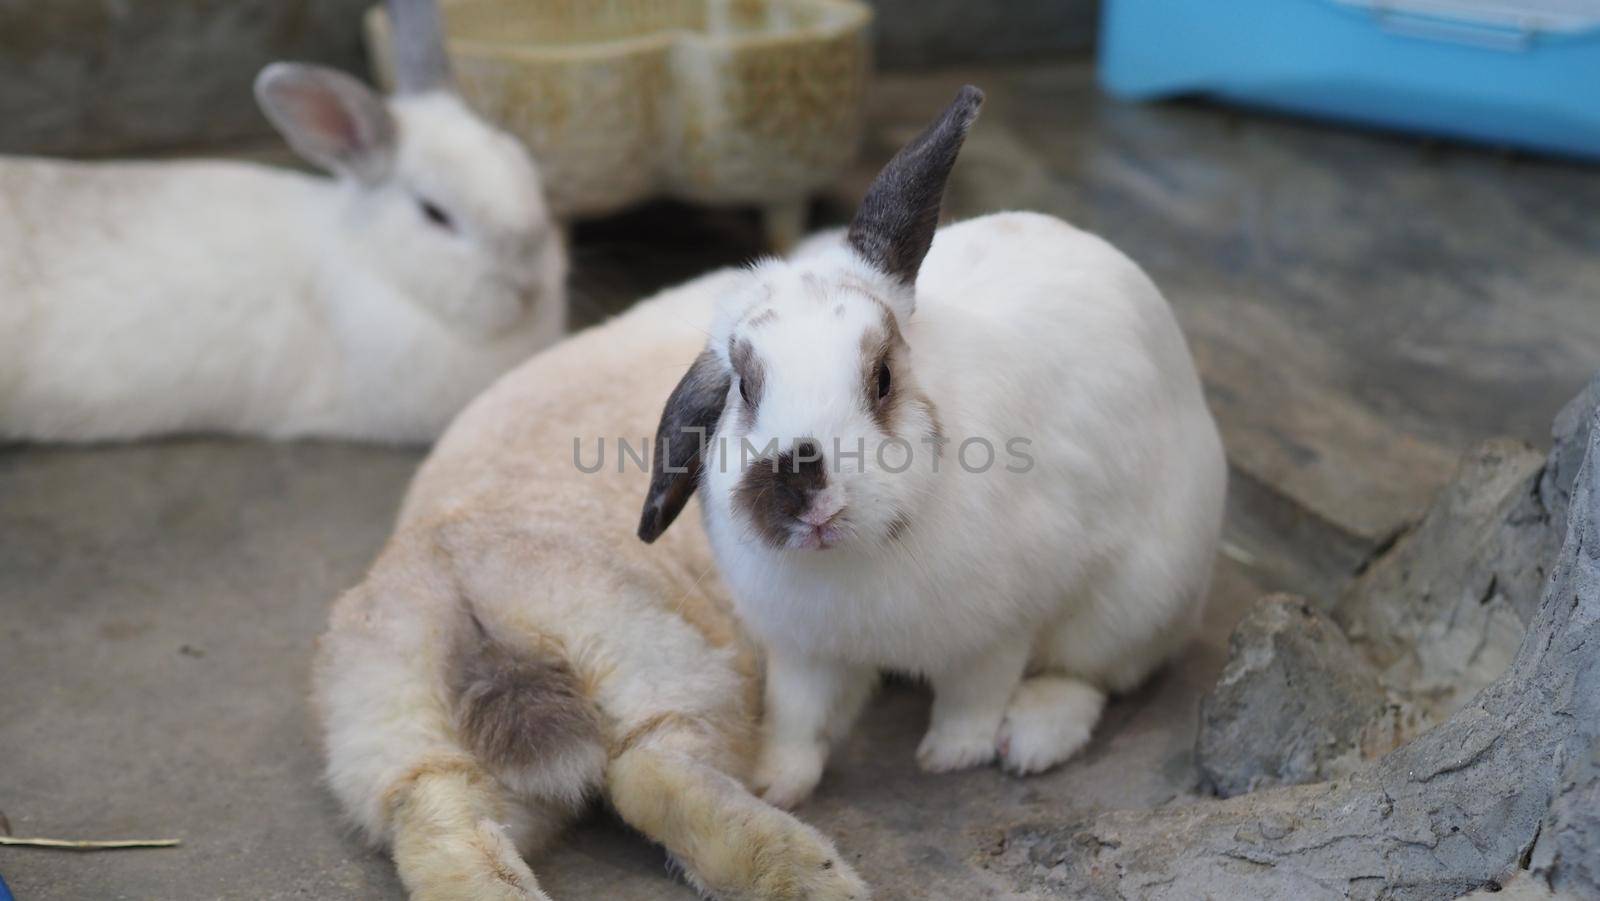 White color rabbit or bunny sitting and playing on cement floor in house by gnepphoto